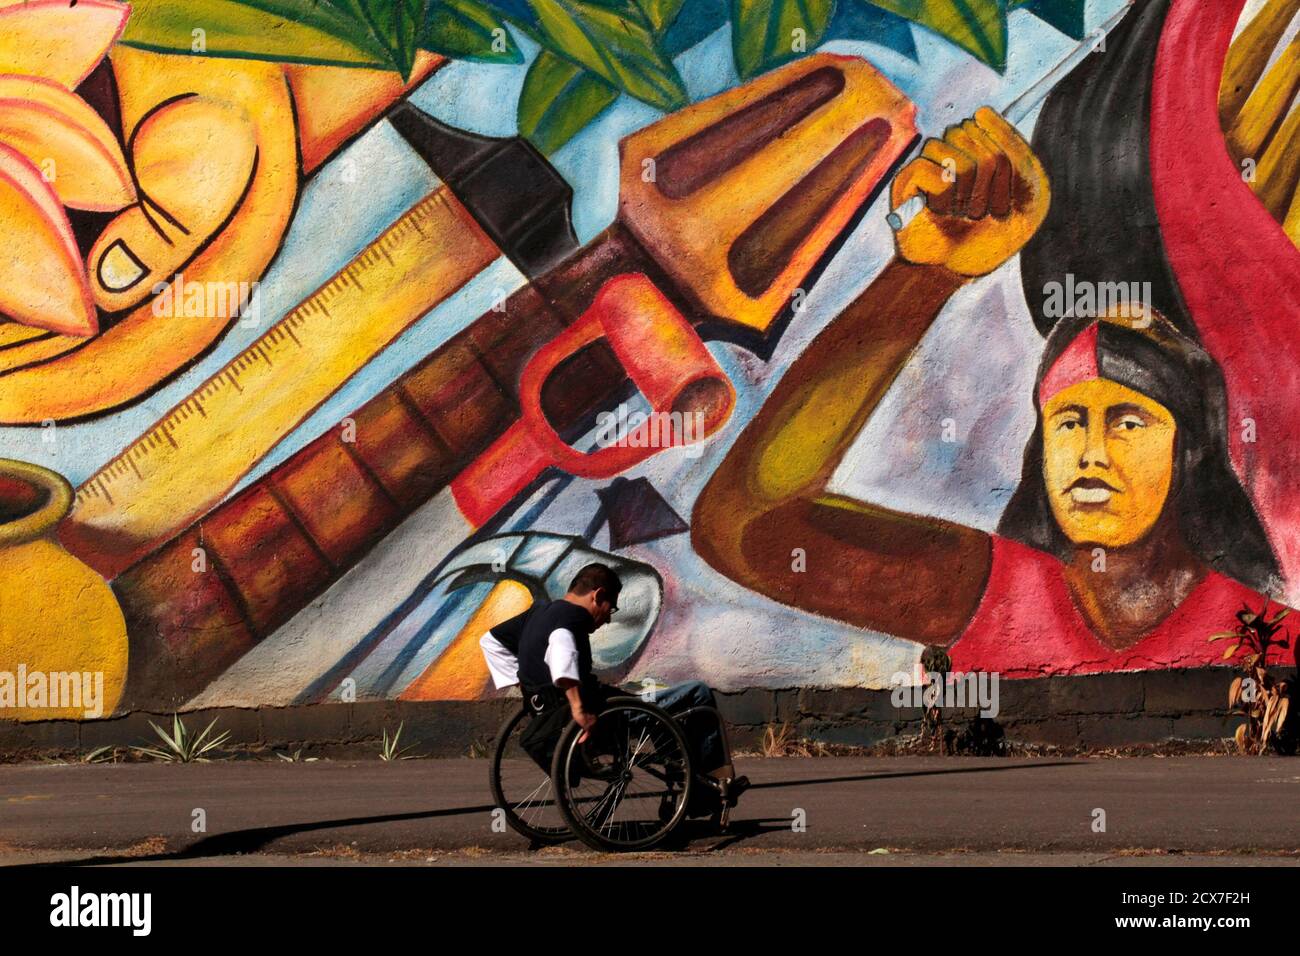 A disabled man passes in front of a mural depicting the workers and peasants revolution, in Managua January 14, 2011. REUTERS/Oswaldo Rivas (NICARAGUA - Tags: SOCIETY) Stock Photo